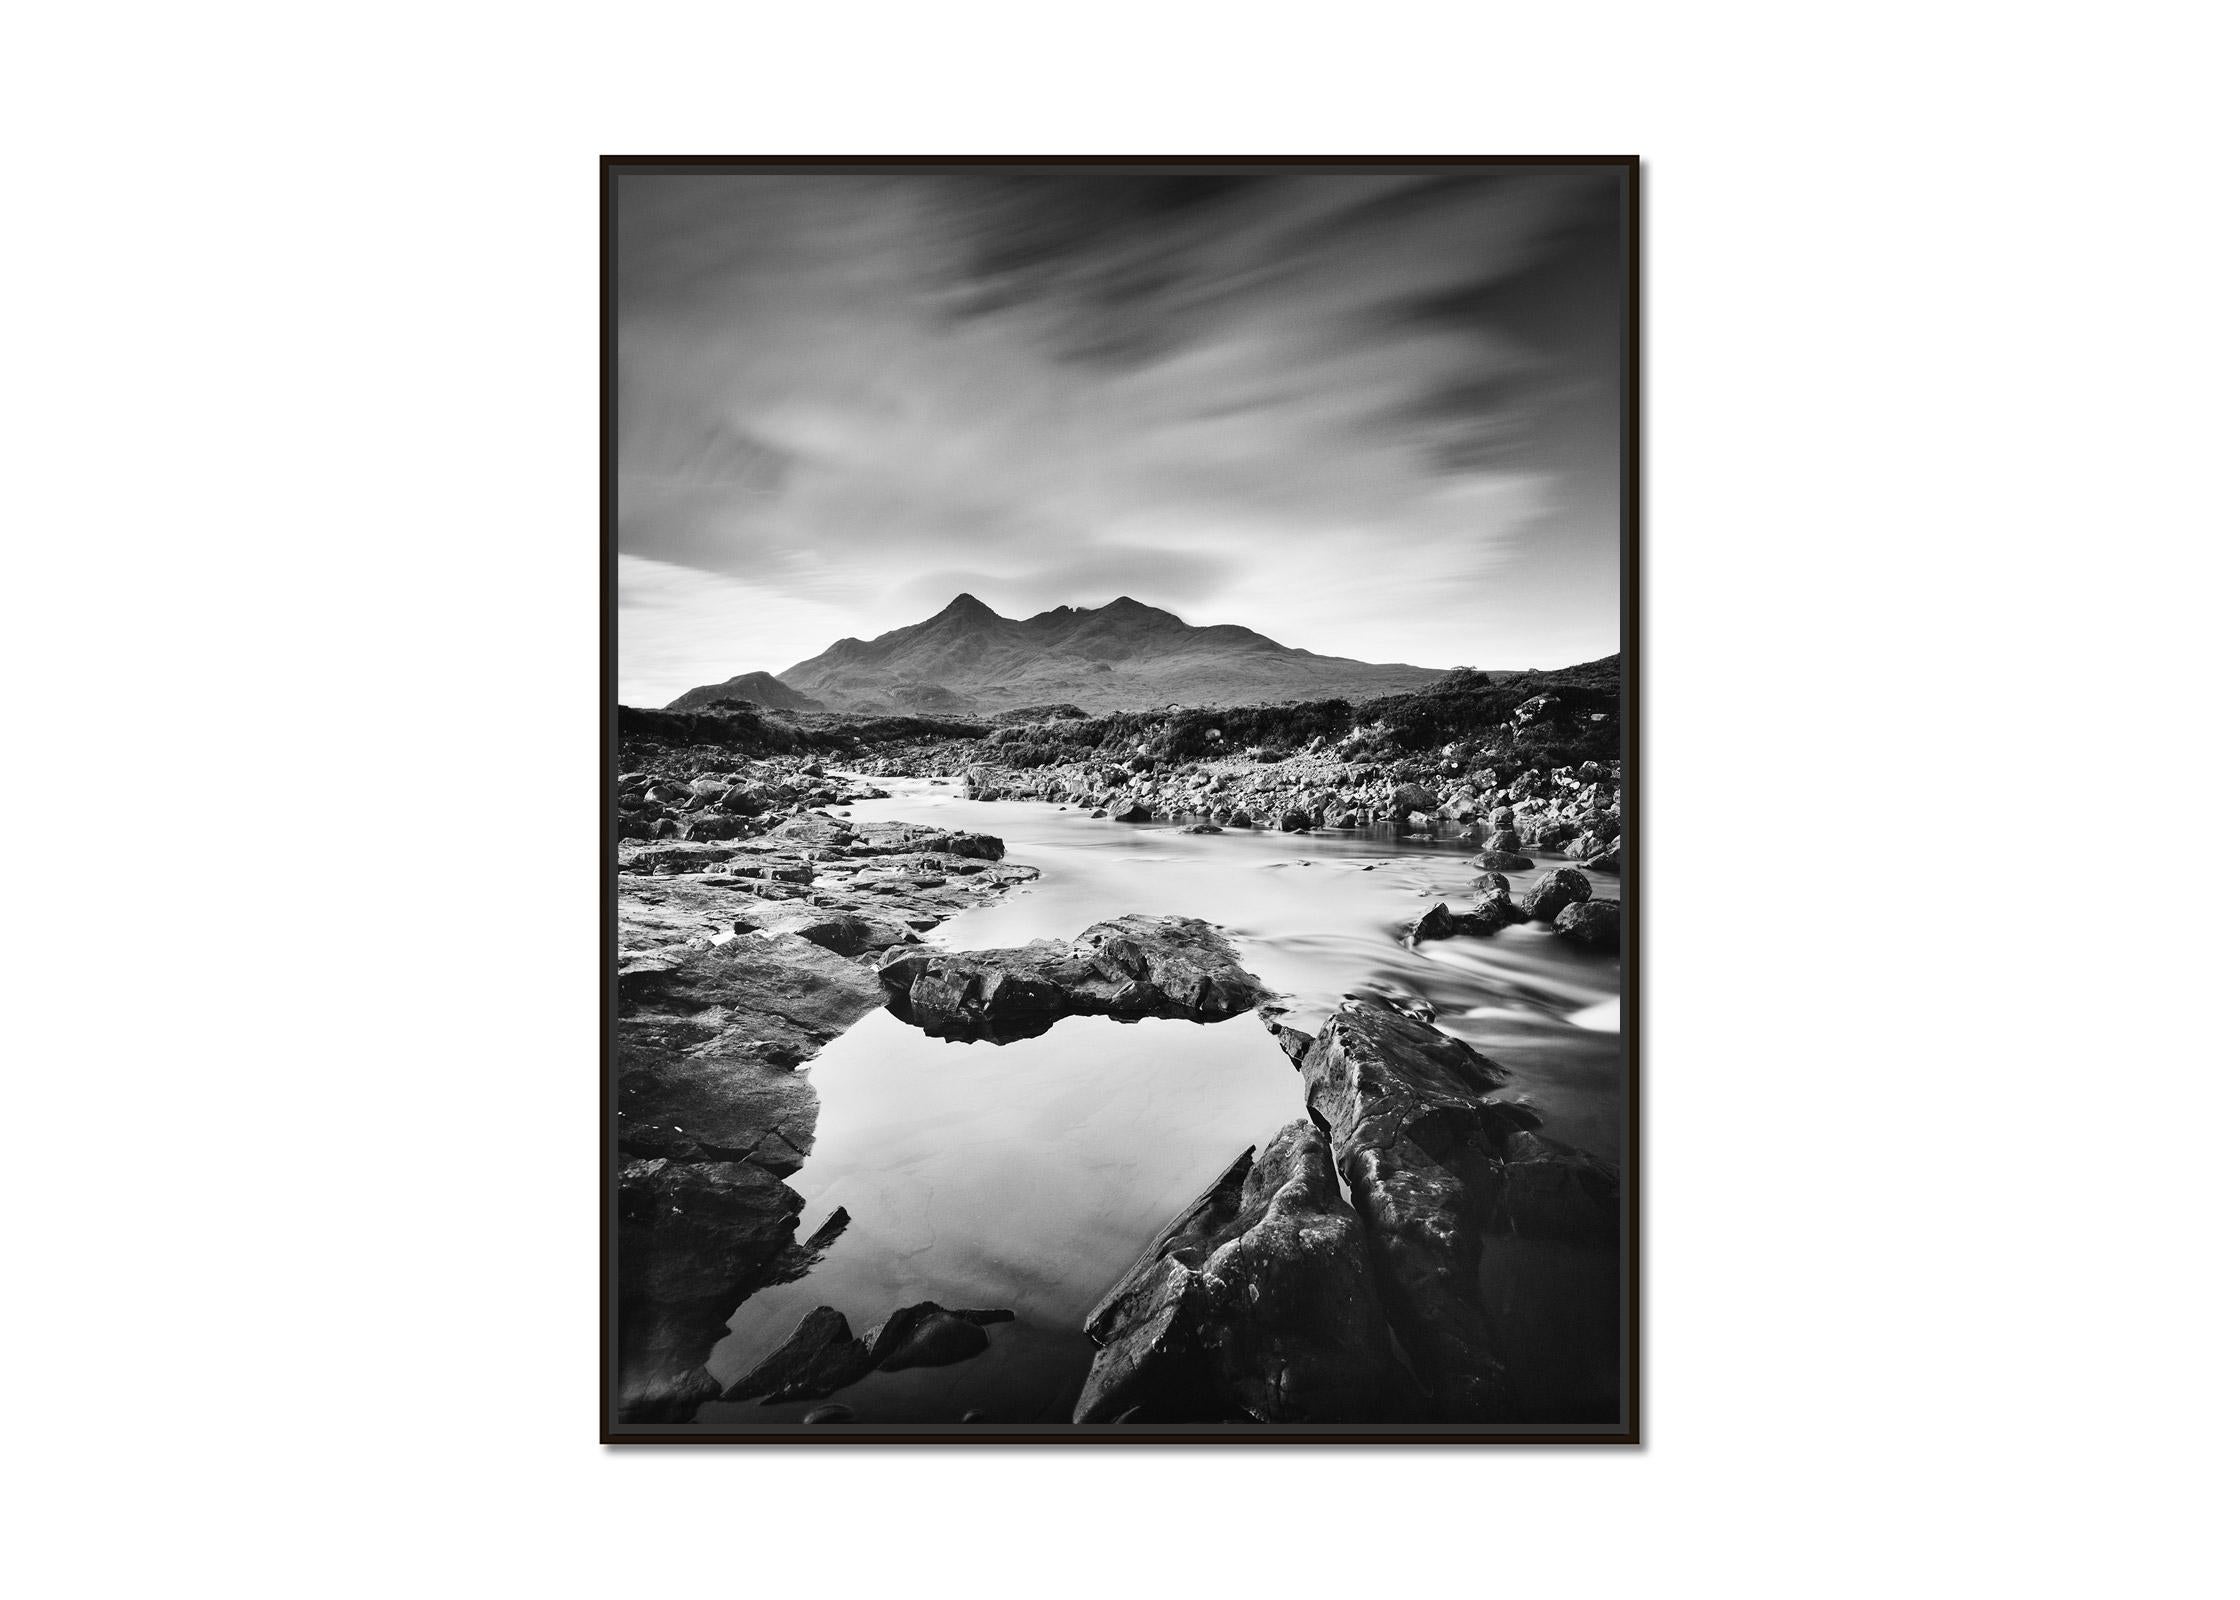 Black Cuillin Hills Mountains Scotland black and white landscape art photography - Photograph by Gerald Berghammer